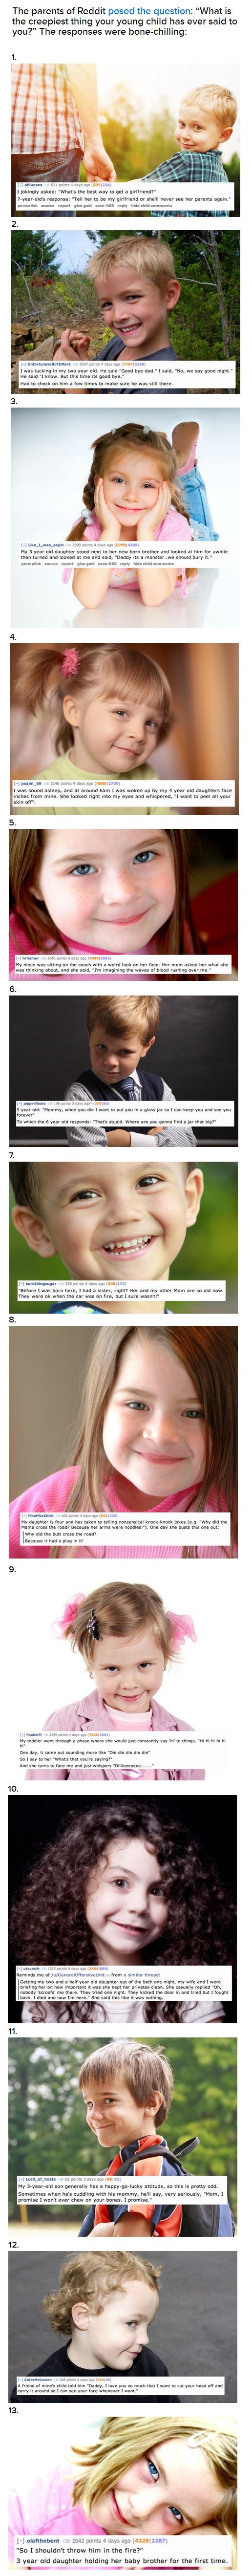 The 13 Creepiest Things A Child Has Ever Said To A Parent -   Misc